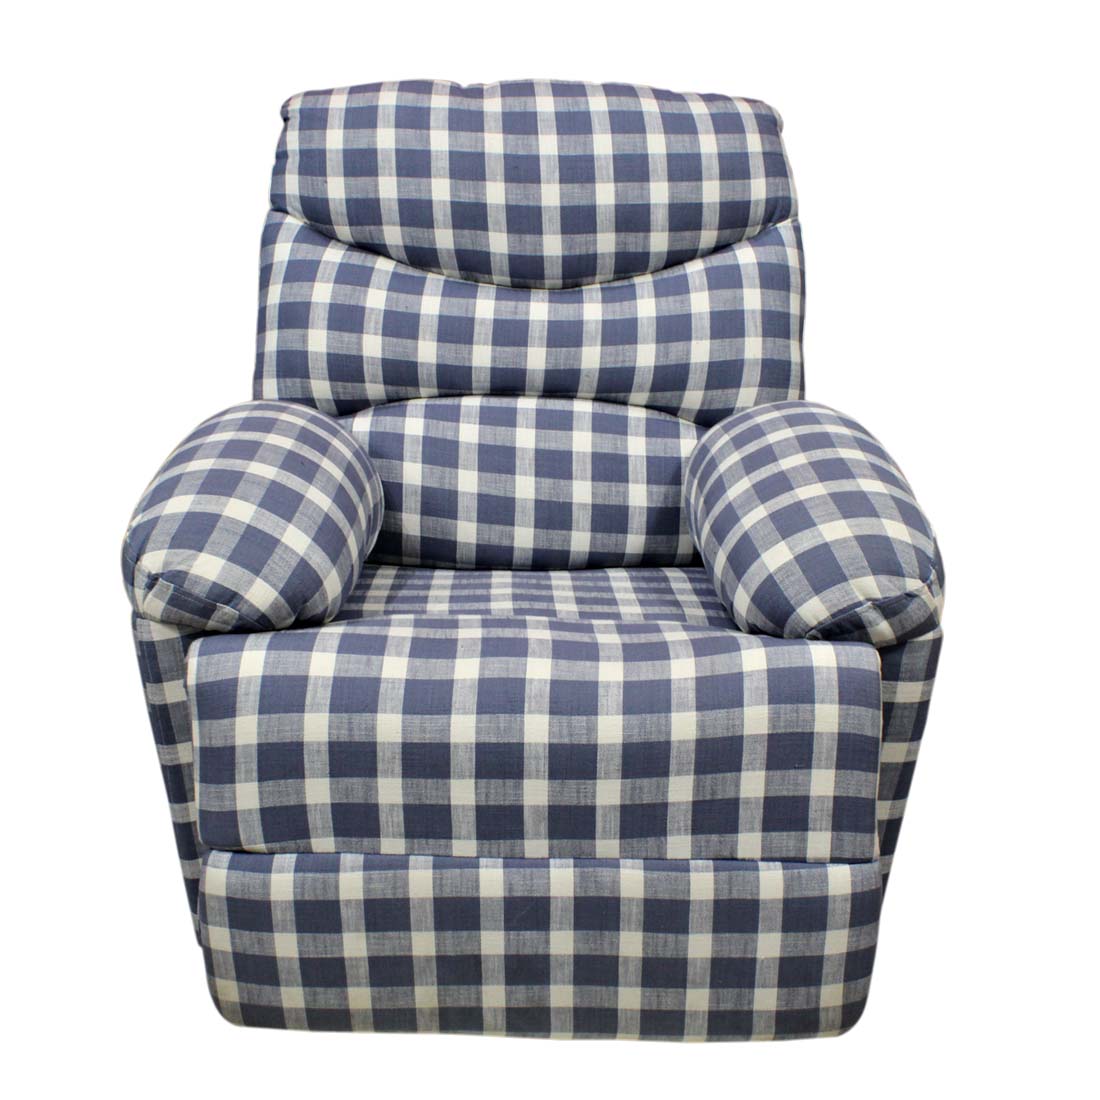 PRIMROSE Turner 3R Rocking And Revolving Recliner With Cotton Fabric - Blue And White